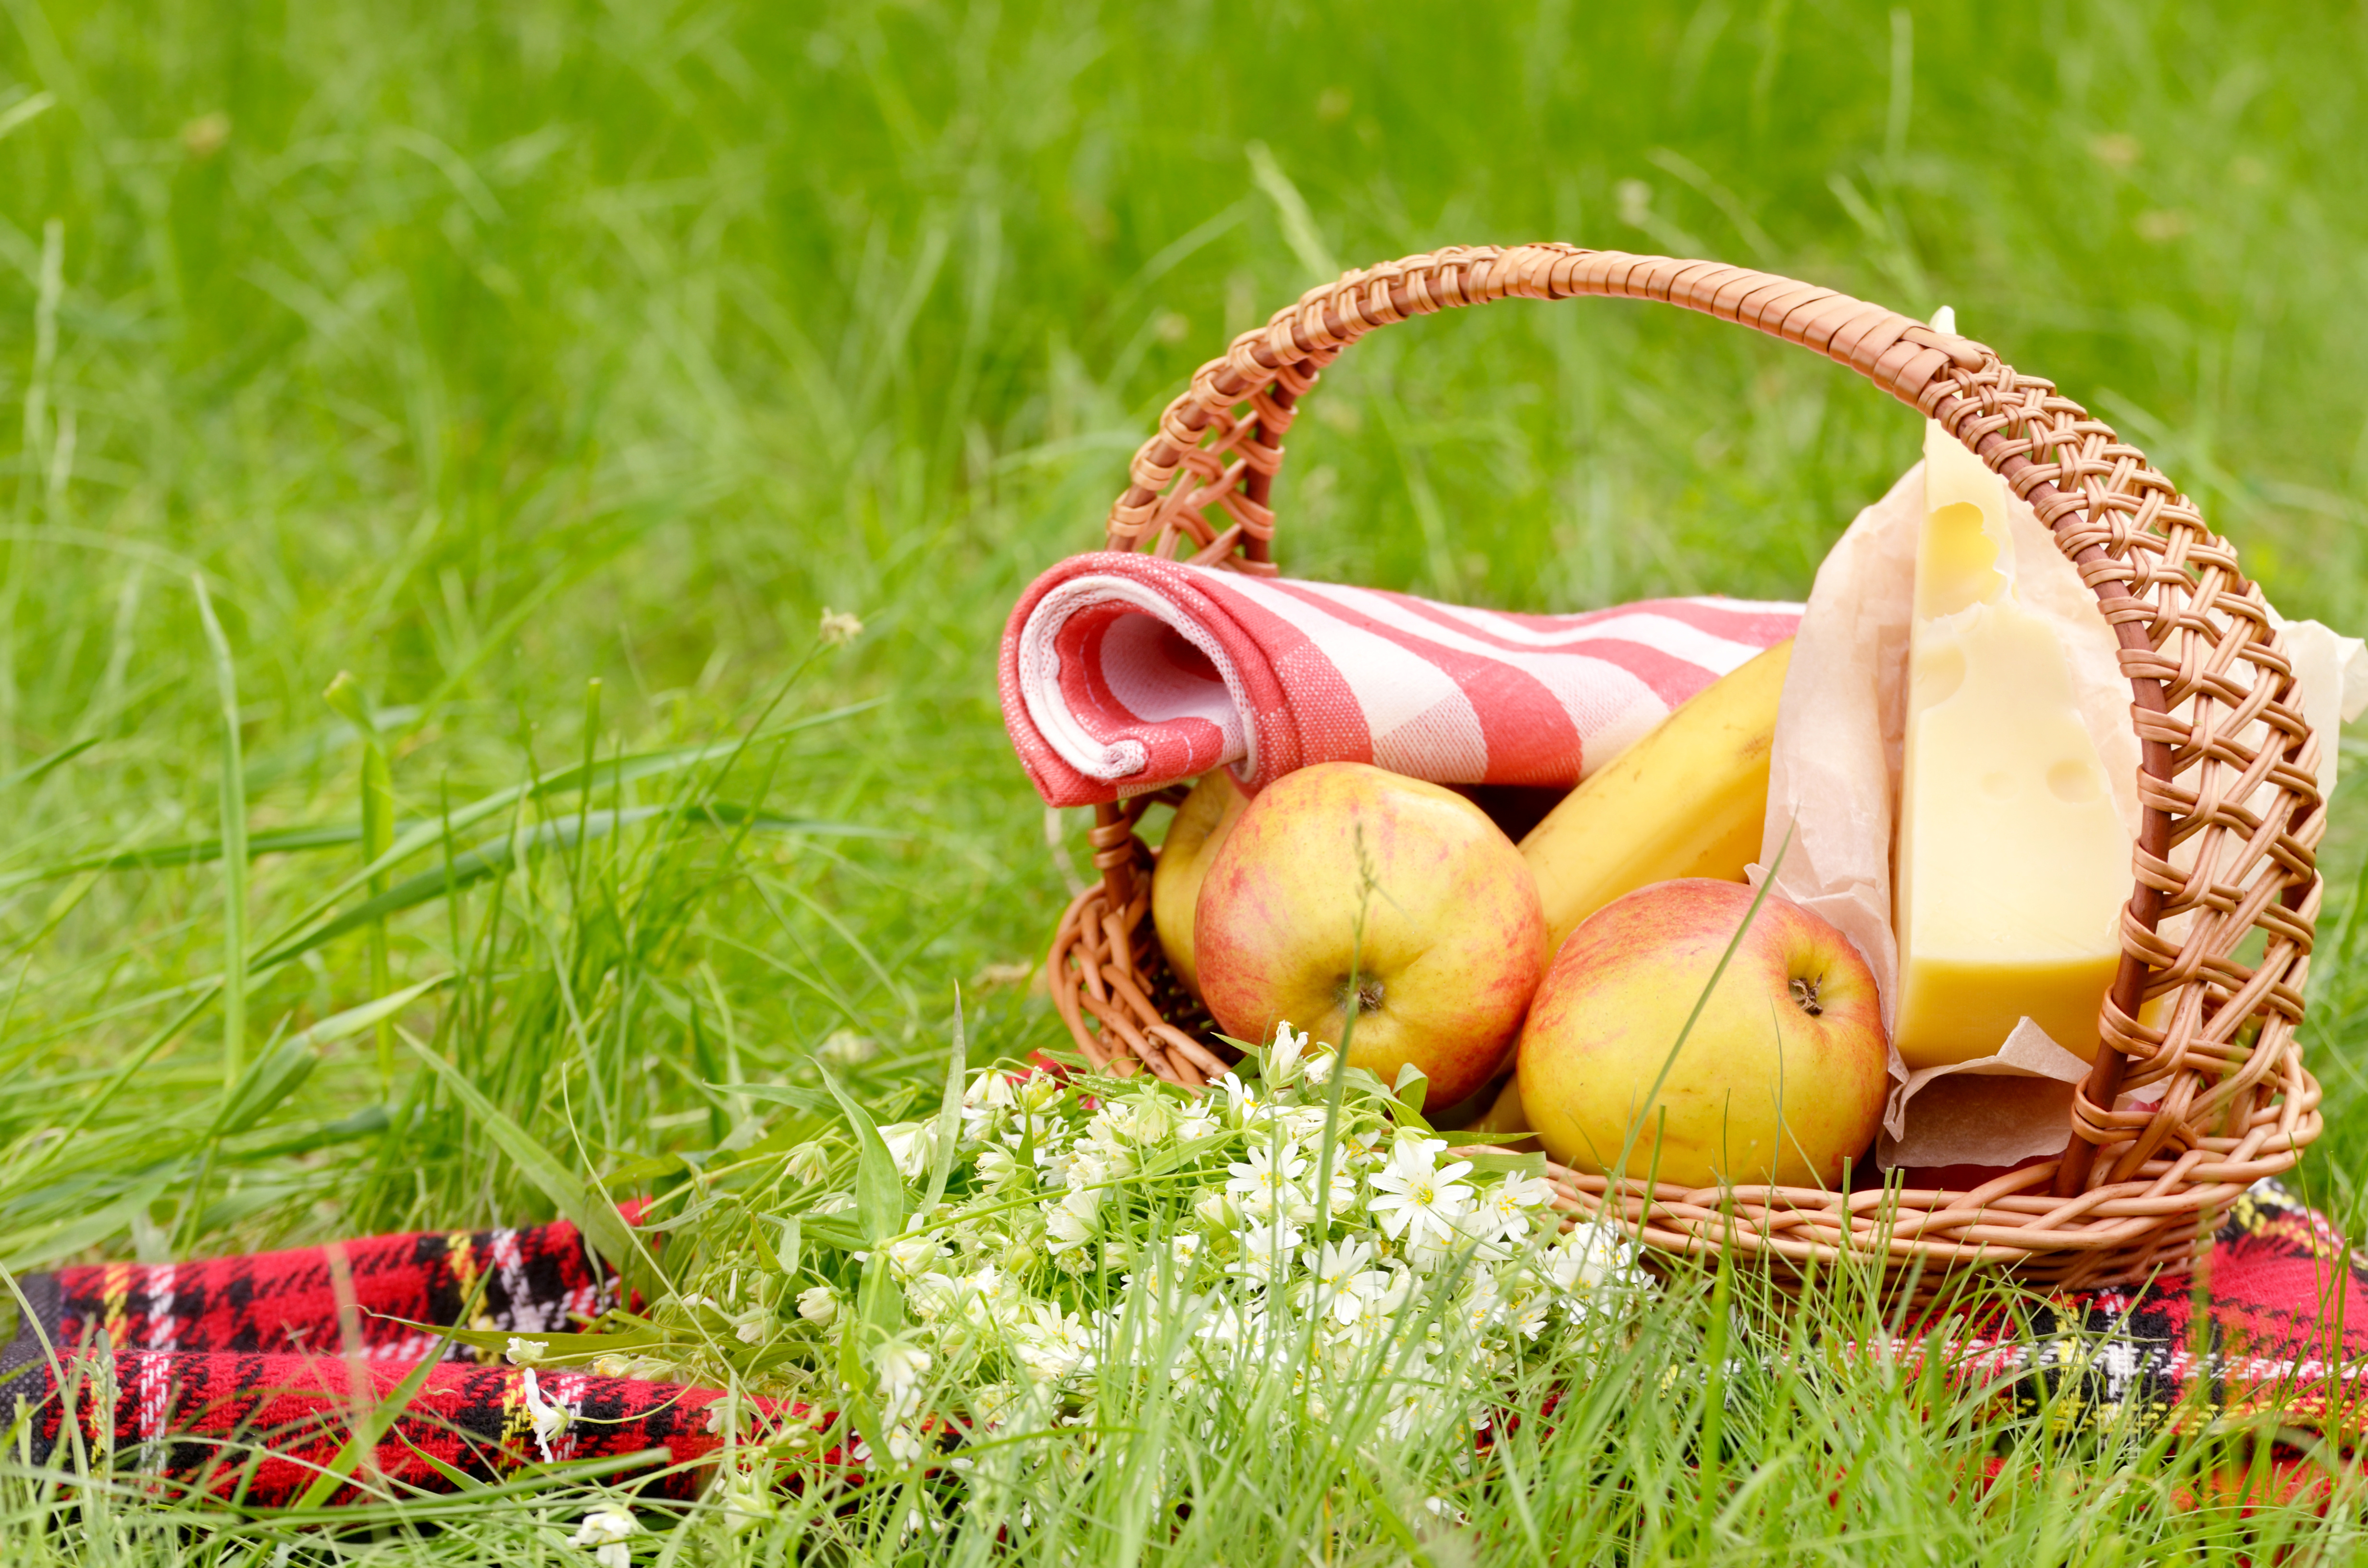 Picnic Images (HD) - Download Royalty-Free Pictures of Picnics